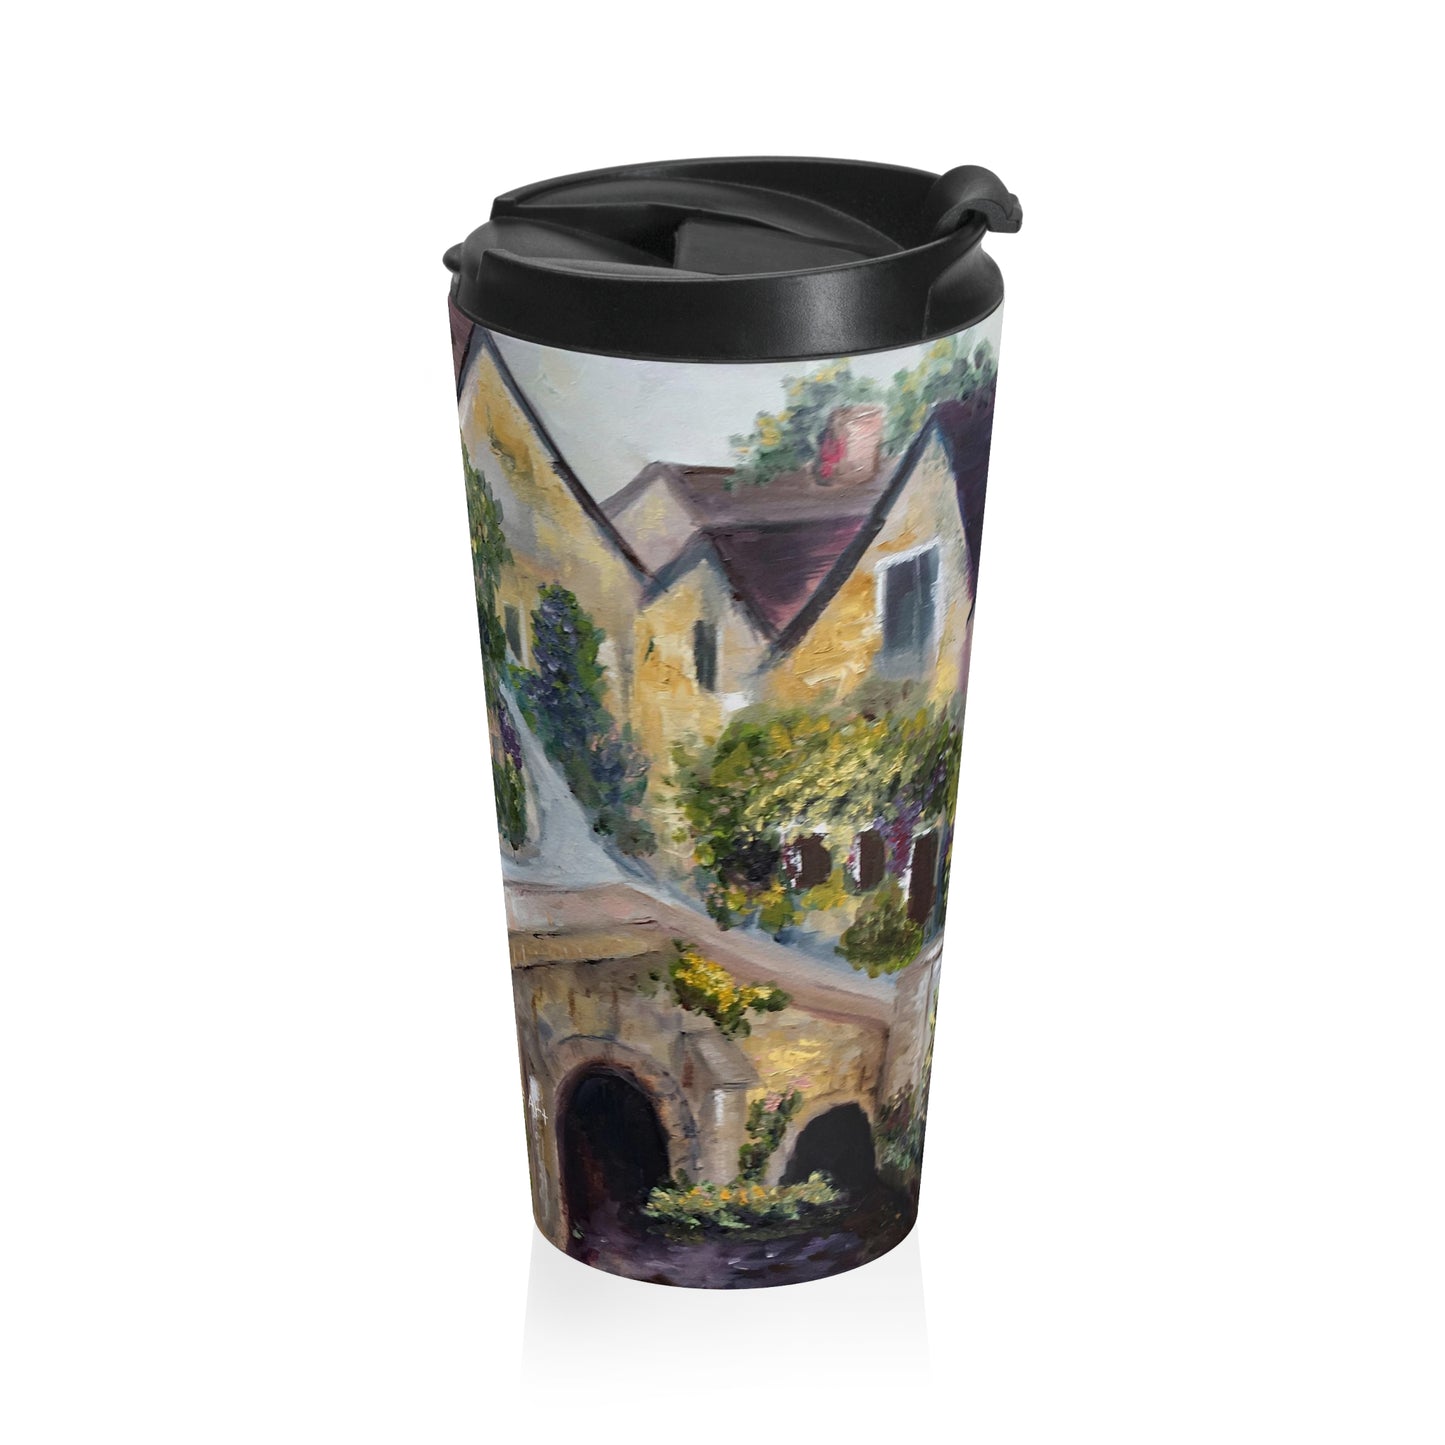 Castle Combe Cotswolds Stainless Steel Travel Mug